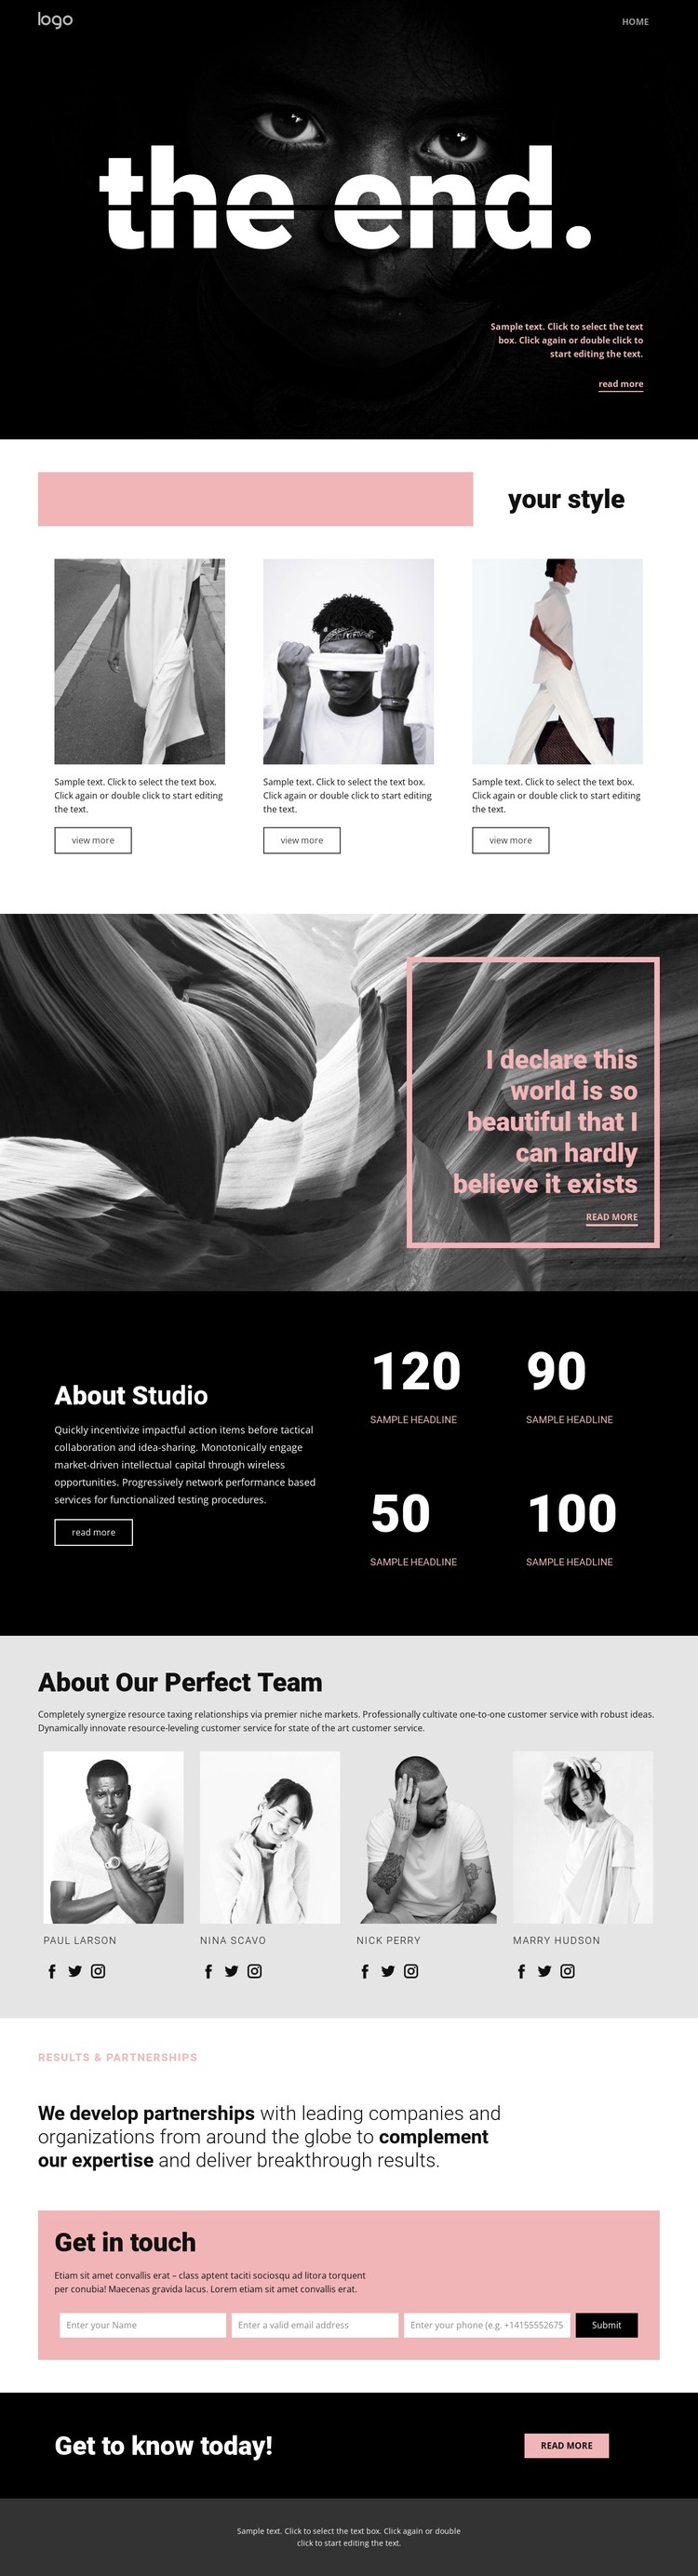 Perfecting styles of art CSS Template